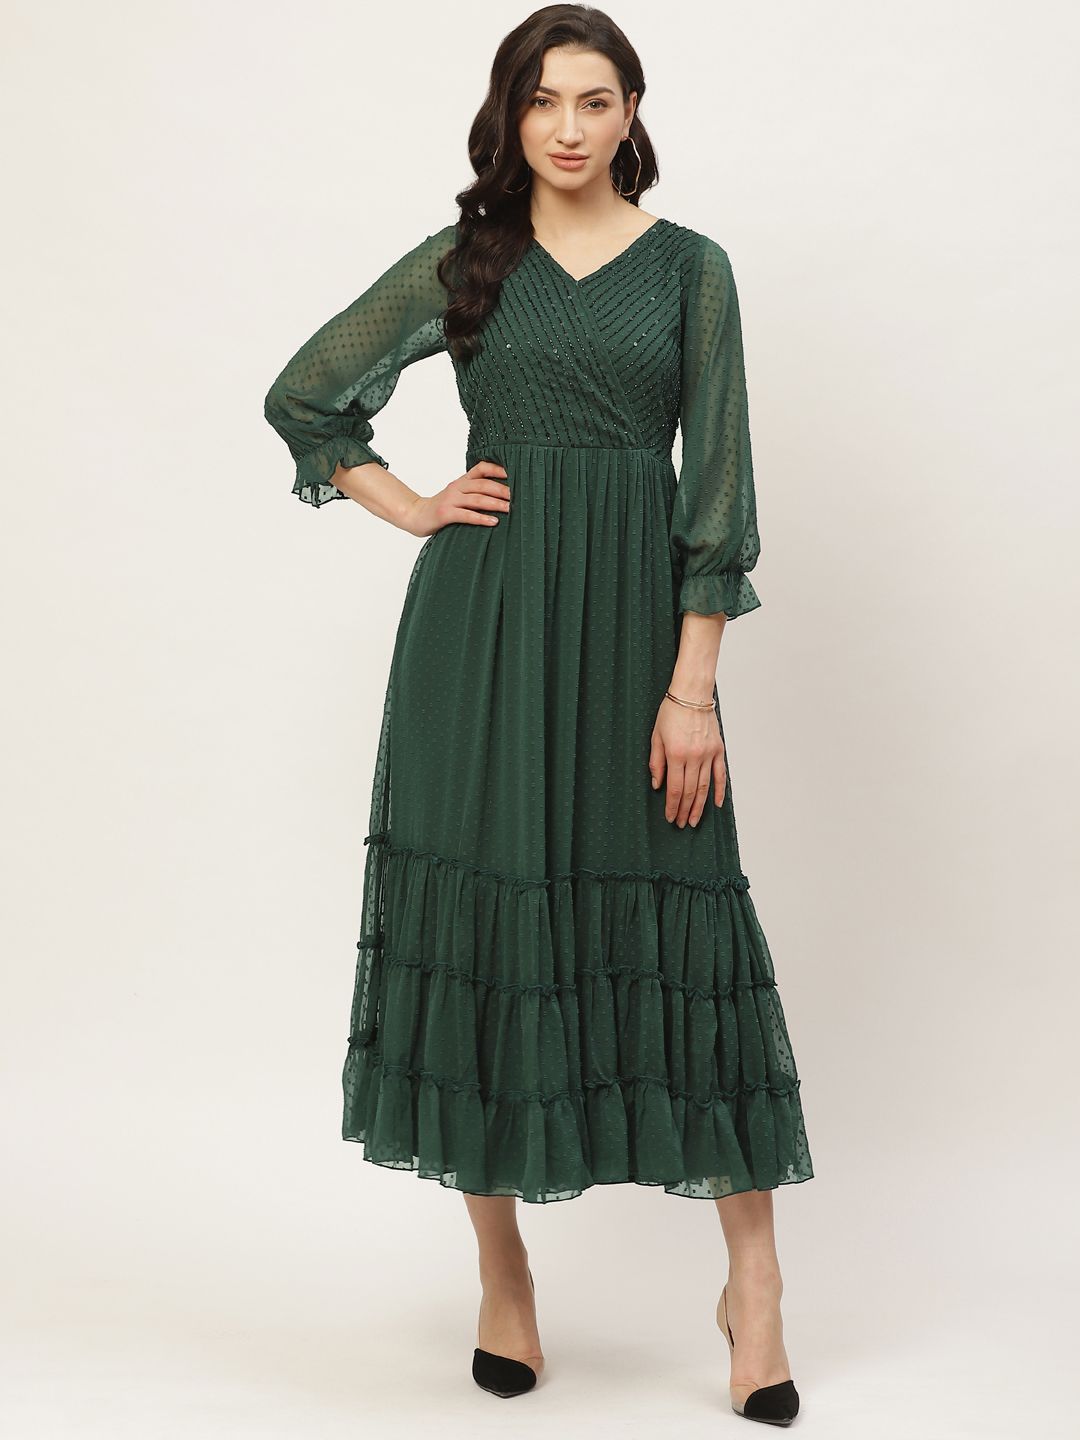 Antheaa Green Embellished Dobby Weave Tiered Midi Wrap Dress Price in India